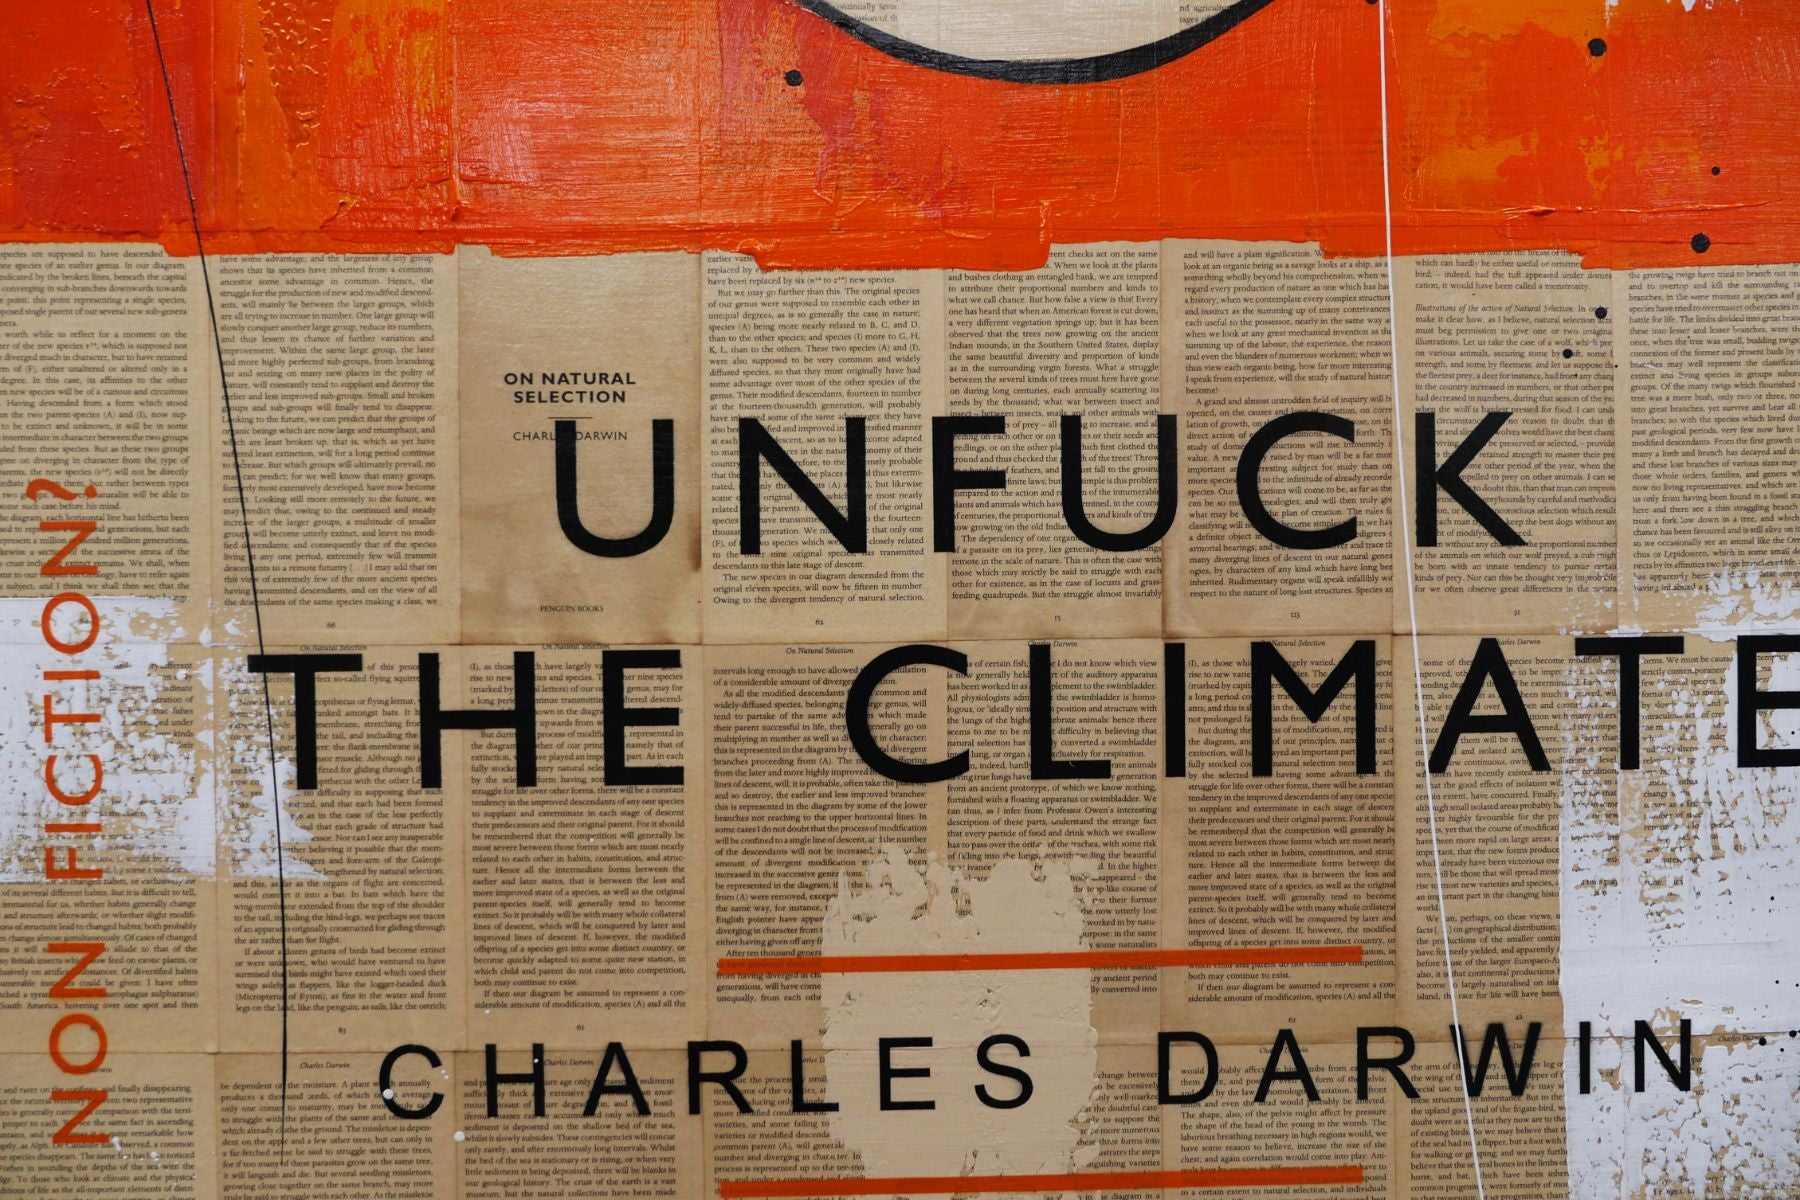 The Changing Climate 140cm x 100cm Urban Pop Book Club Painting (SOLD)